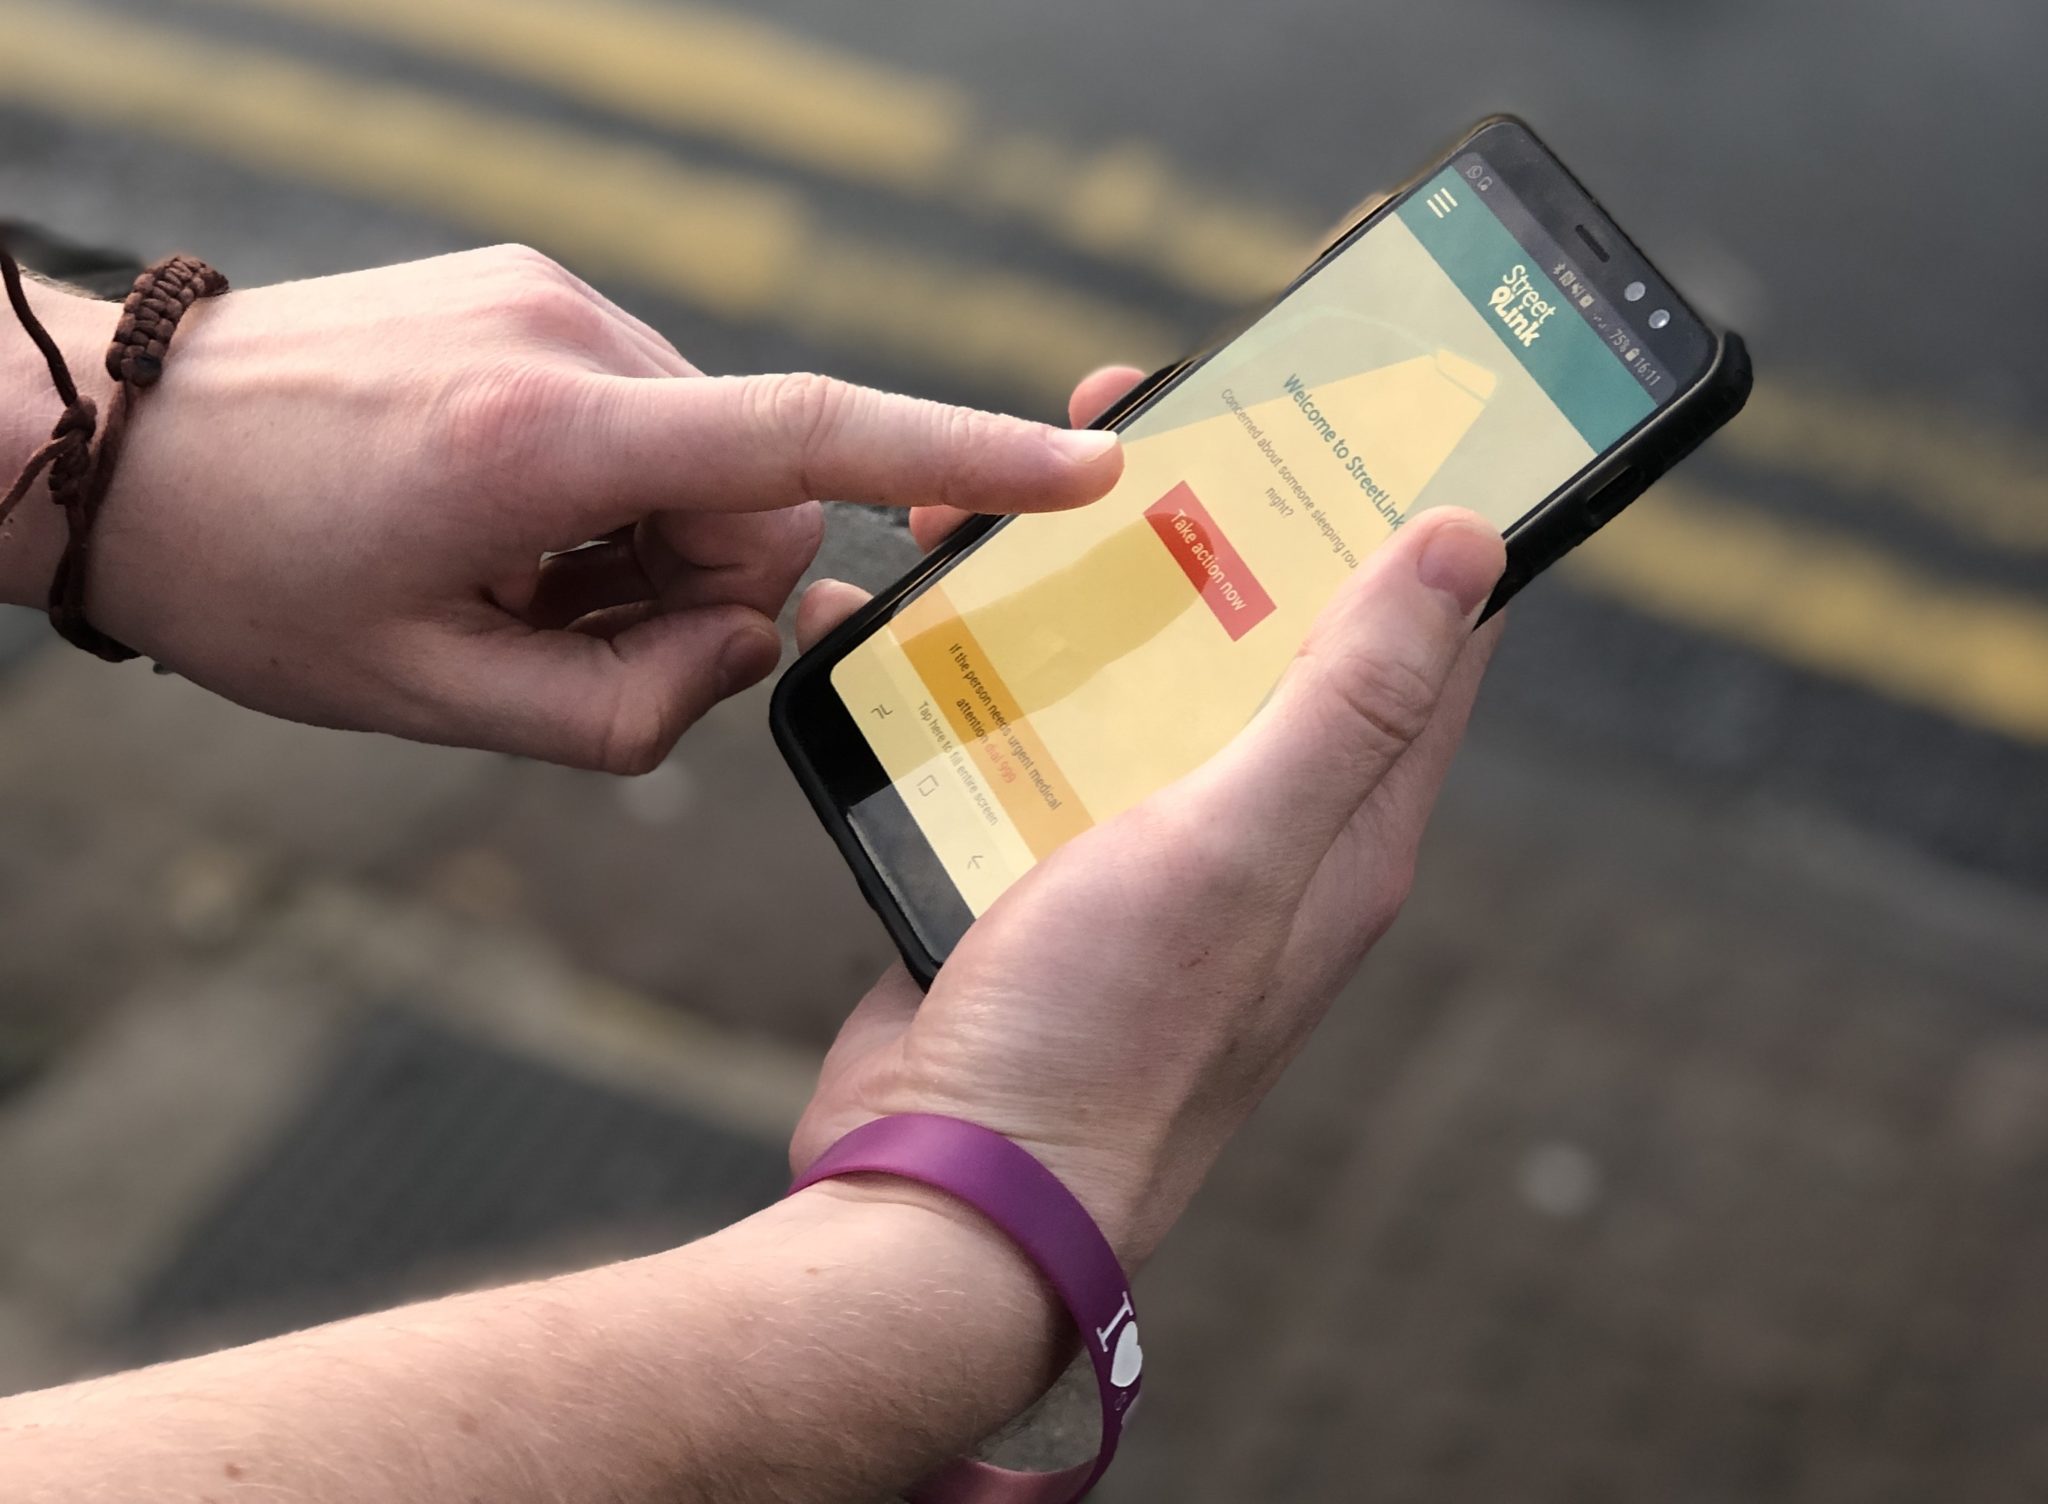 Use StreetLink on your smartphone - help homeless people in Wales and the UK